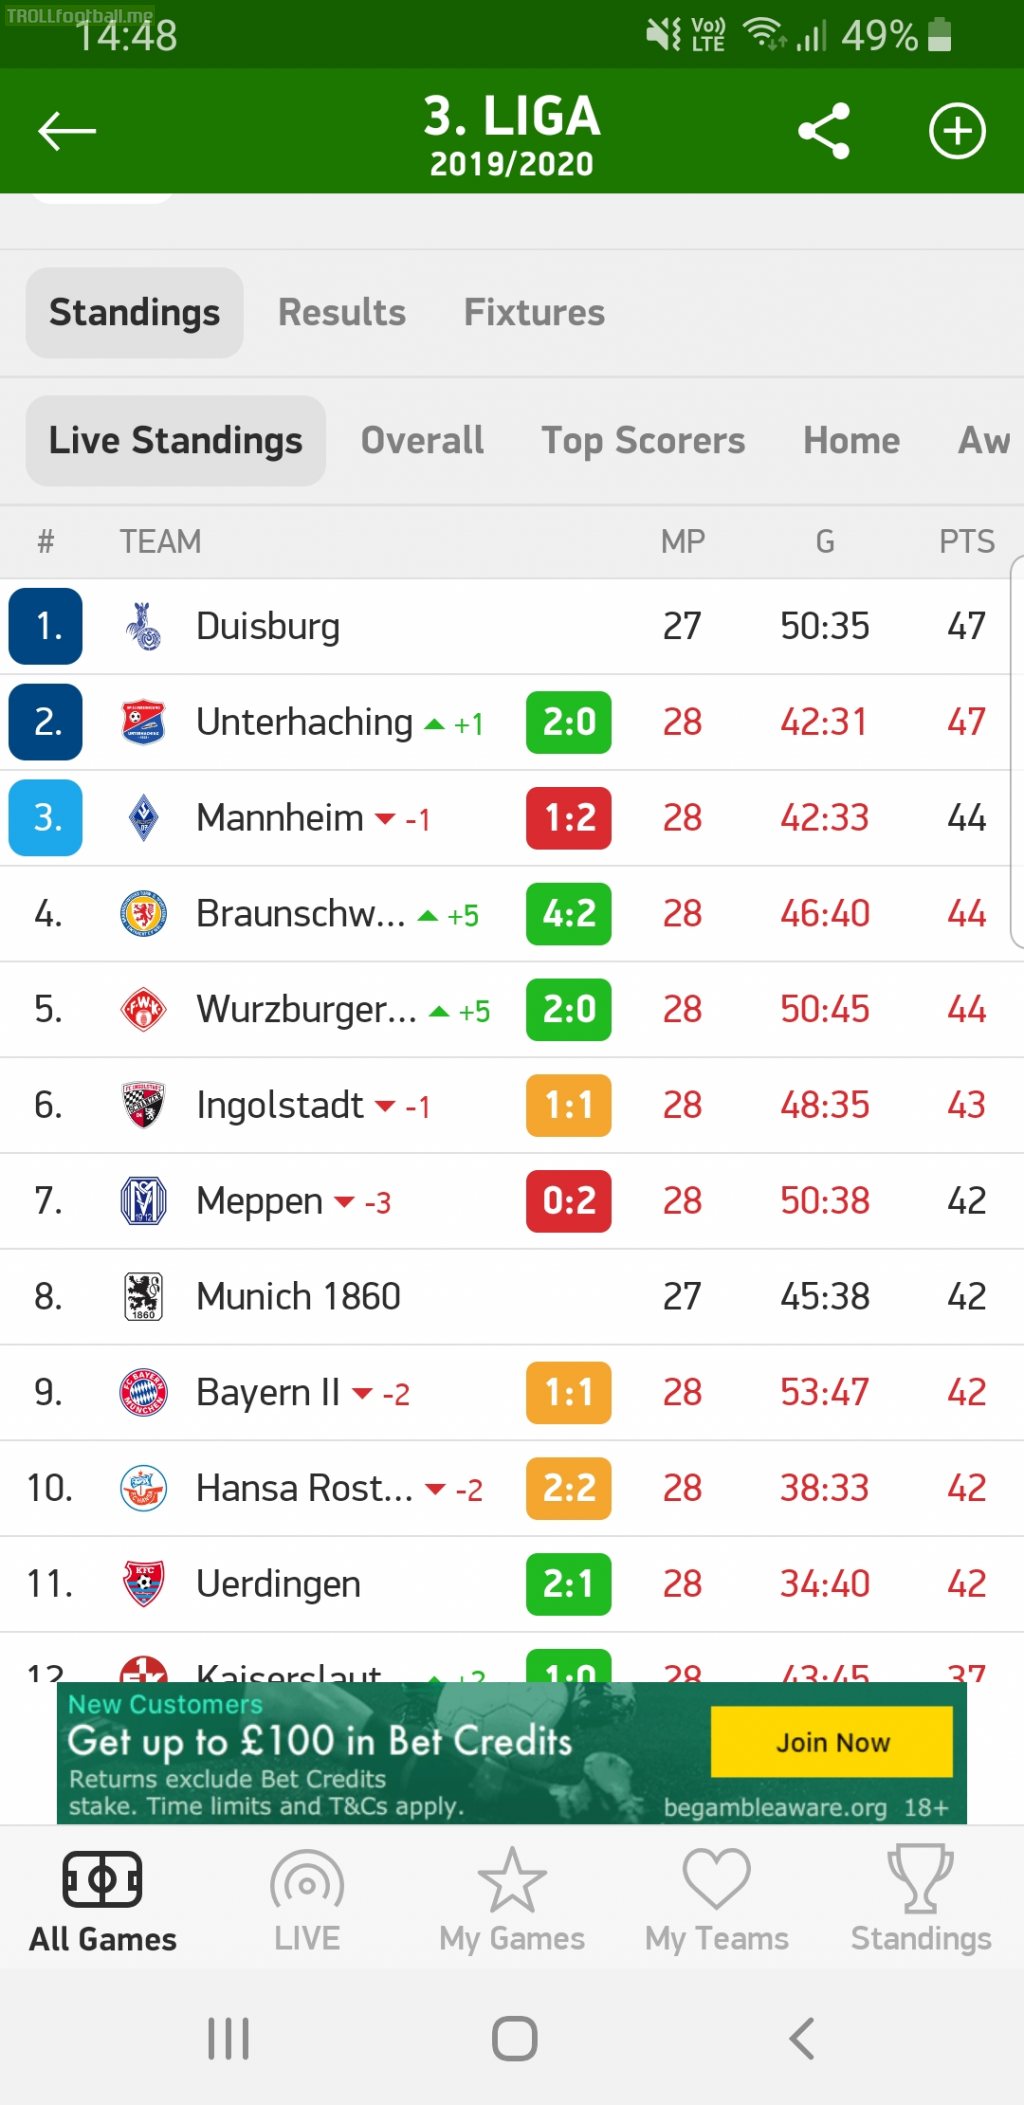 The promotion race in the 3.liga is incredible. 5 points between 11 teams